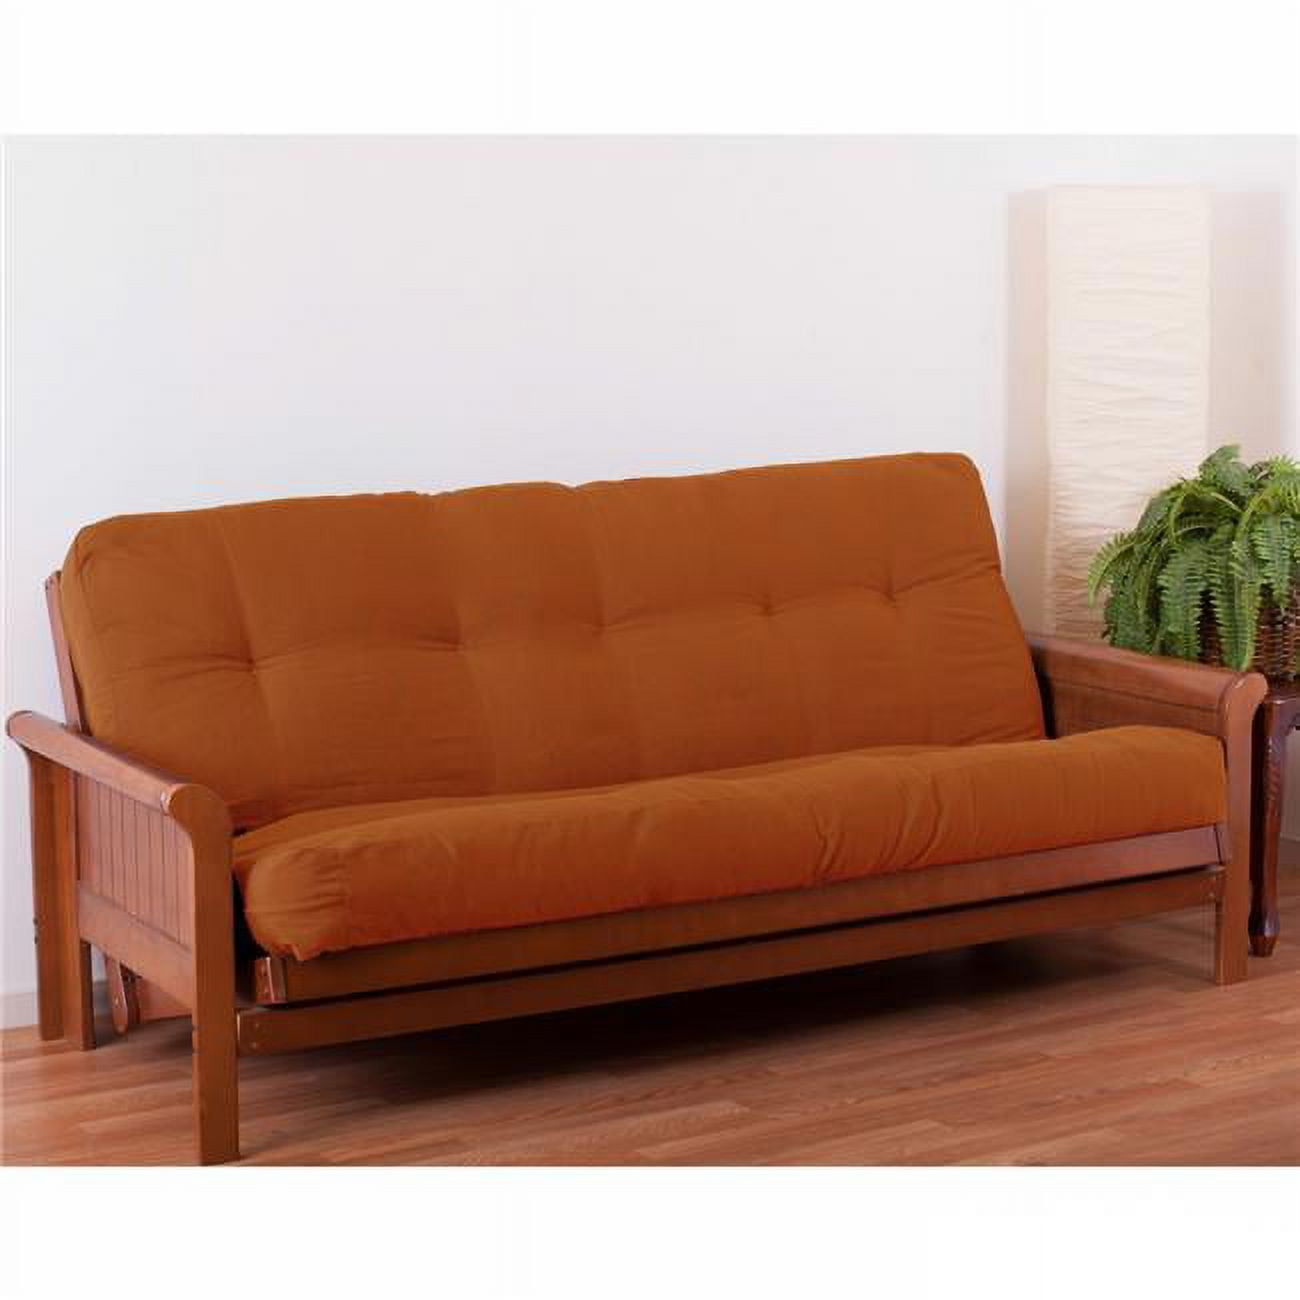 Picture of Blazing Needles 9611-B-TW-SP 7 in. Renewal Twill Queen Size Futon Mattress, Spice